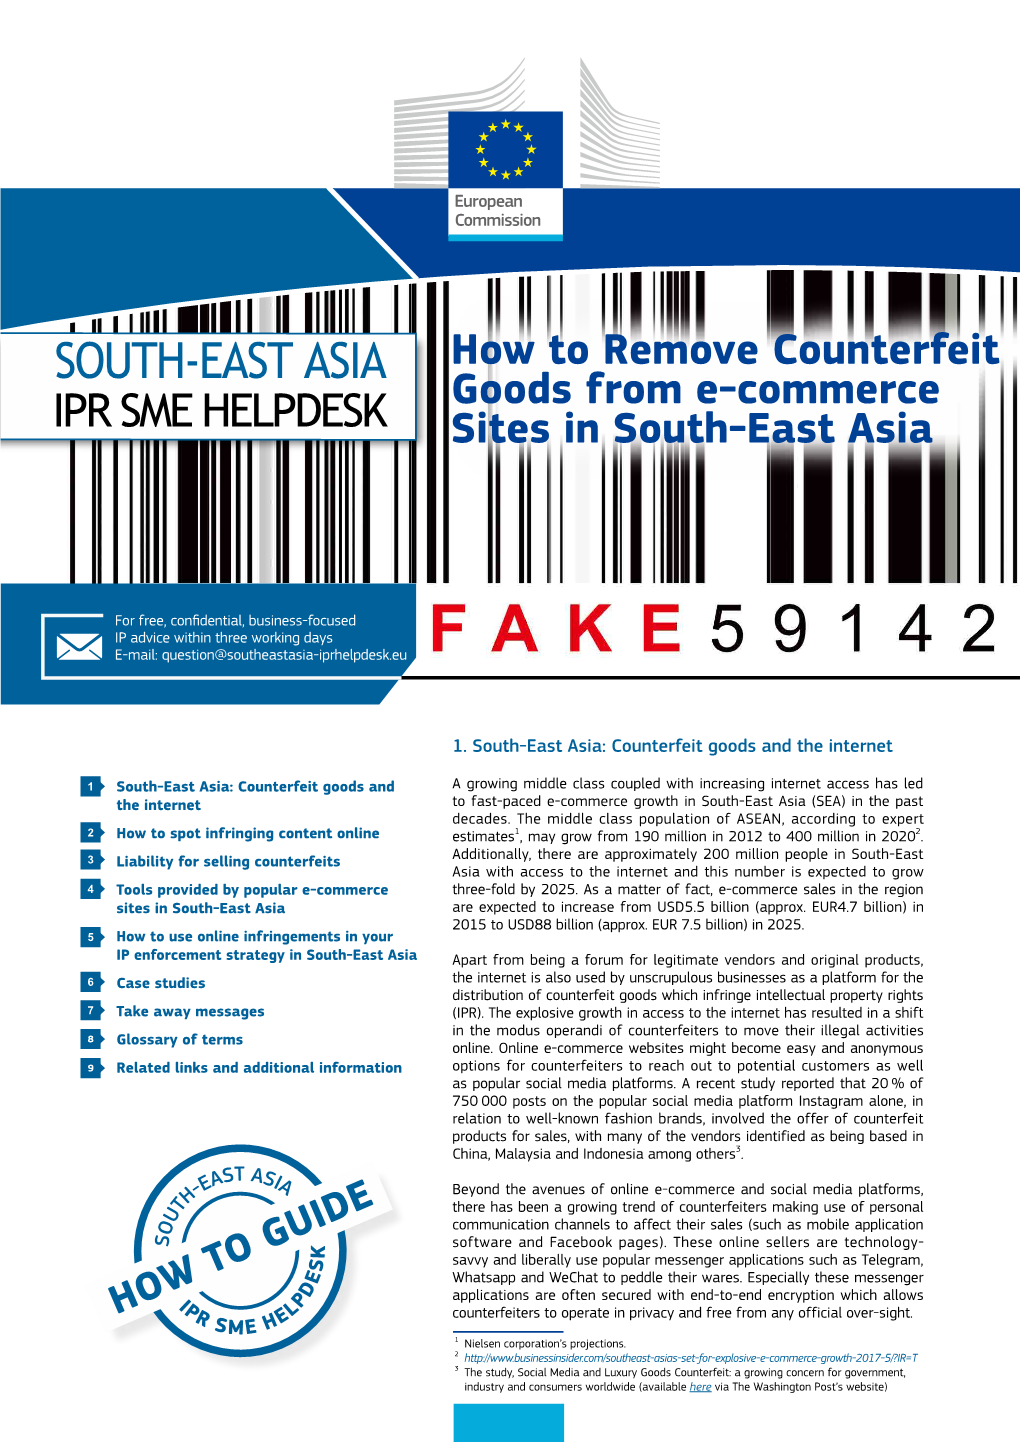 How to Remove Counterfeit Goods from E-Commerce Sites in South-East Asia